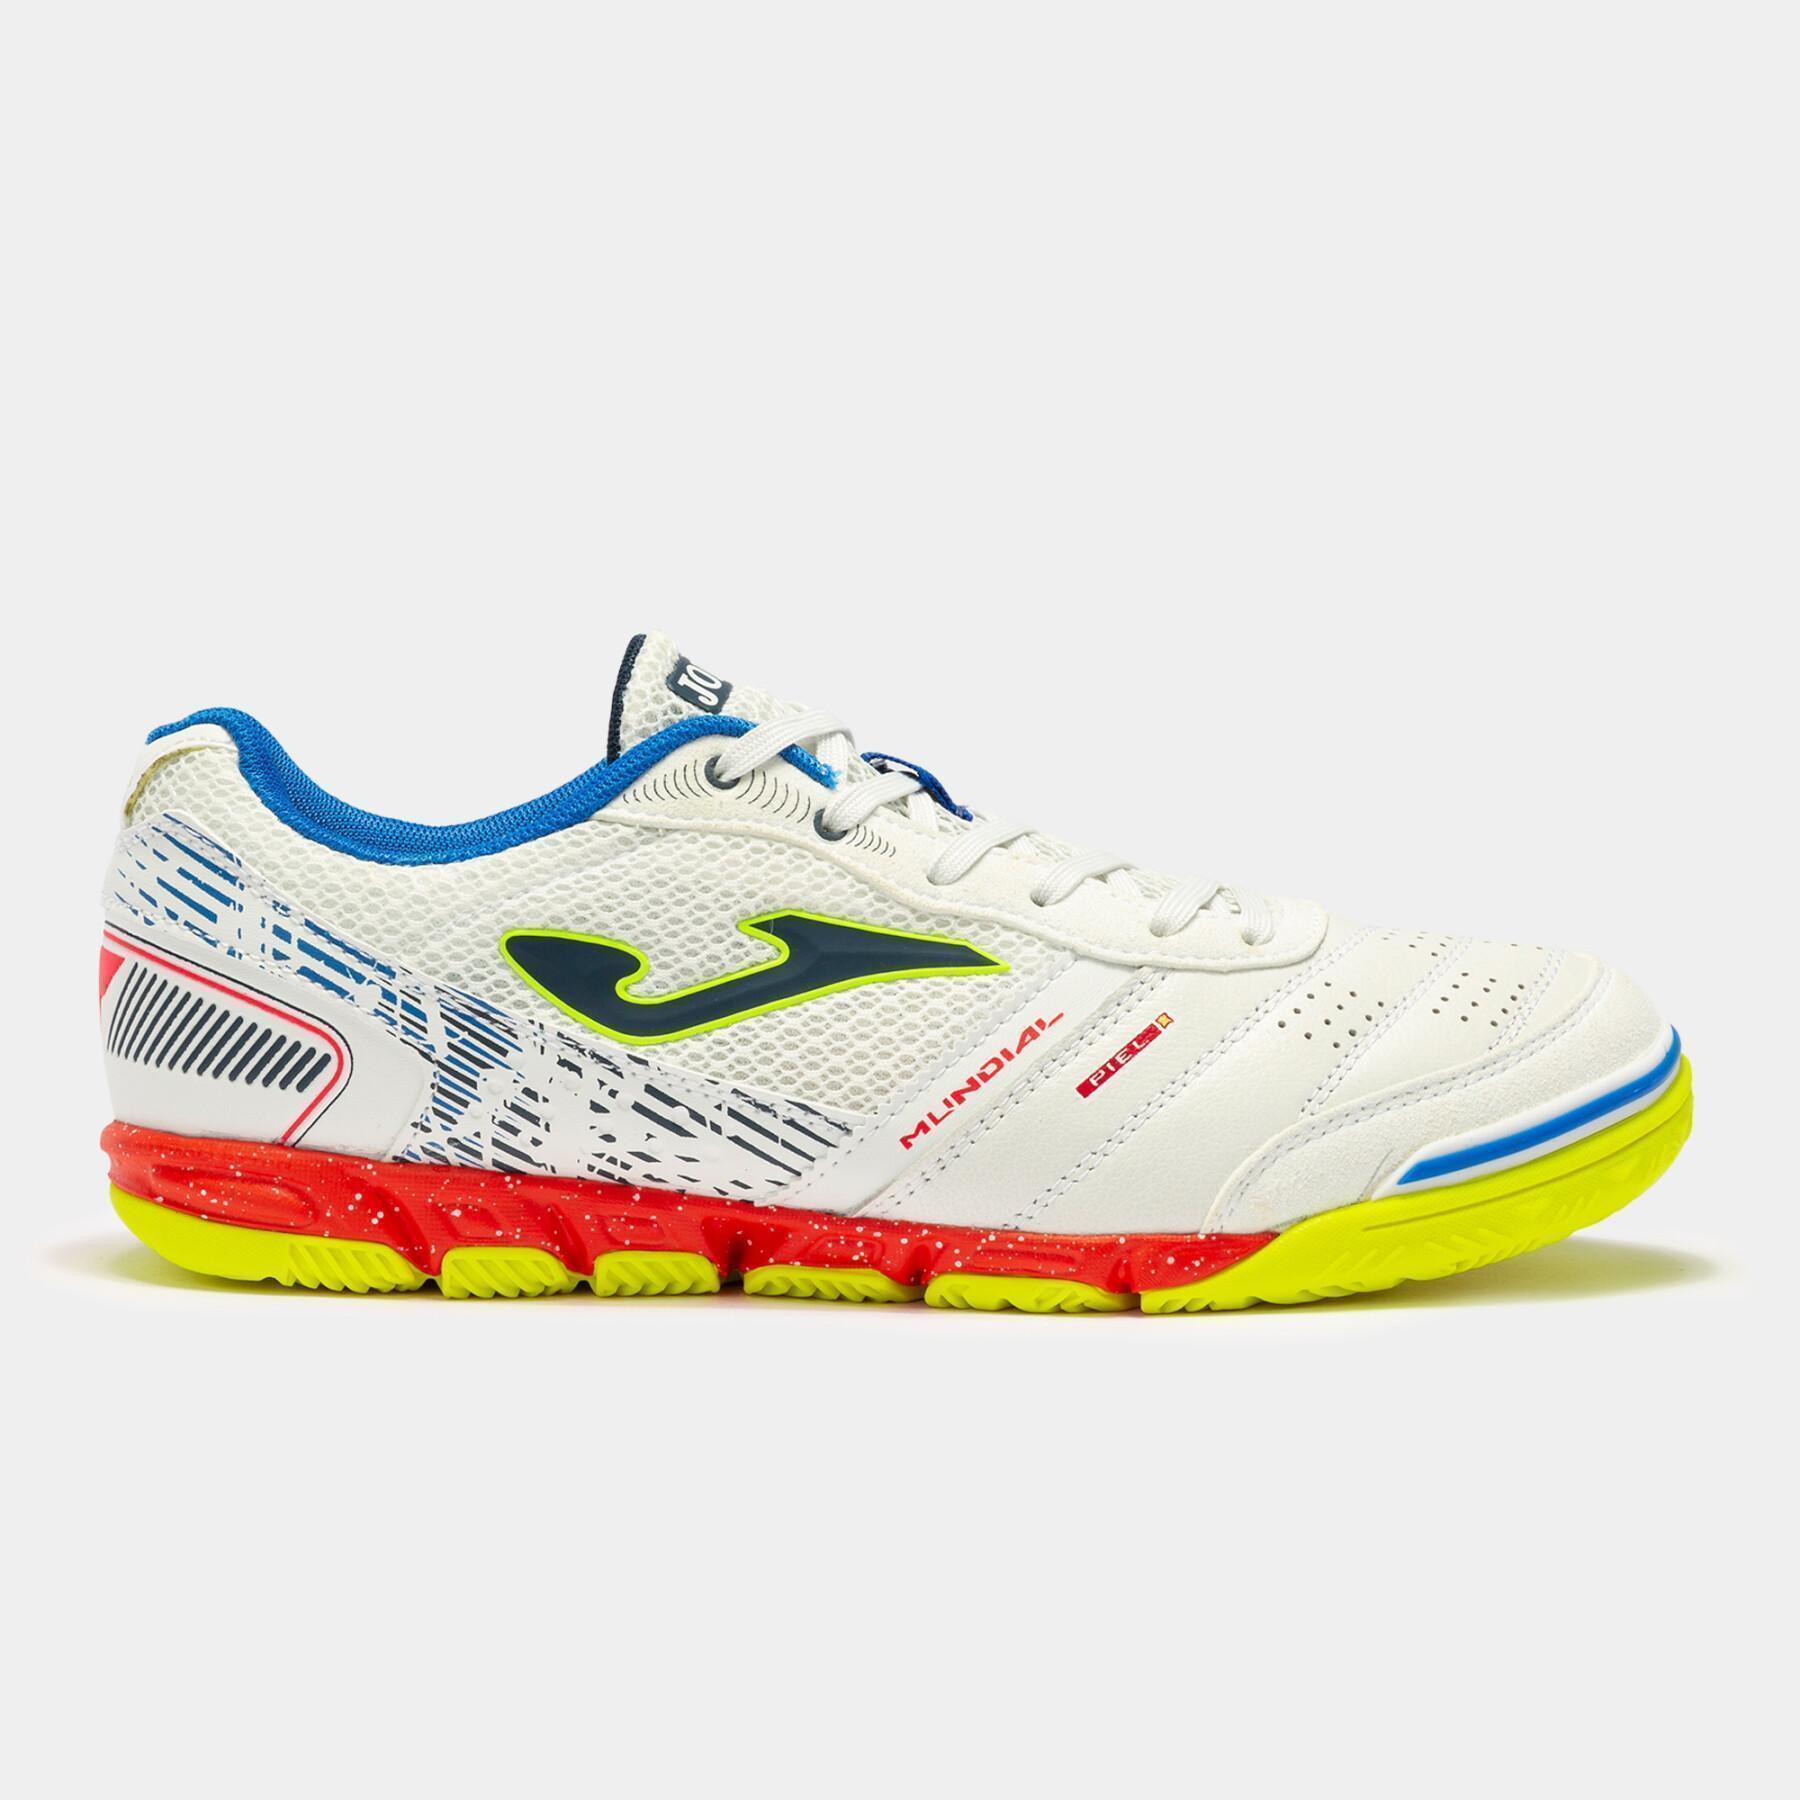 Indoor shoes Joma mundial